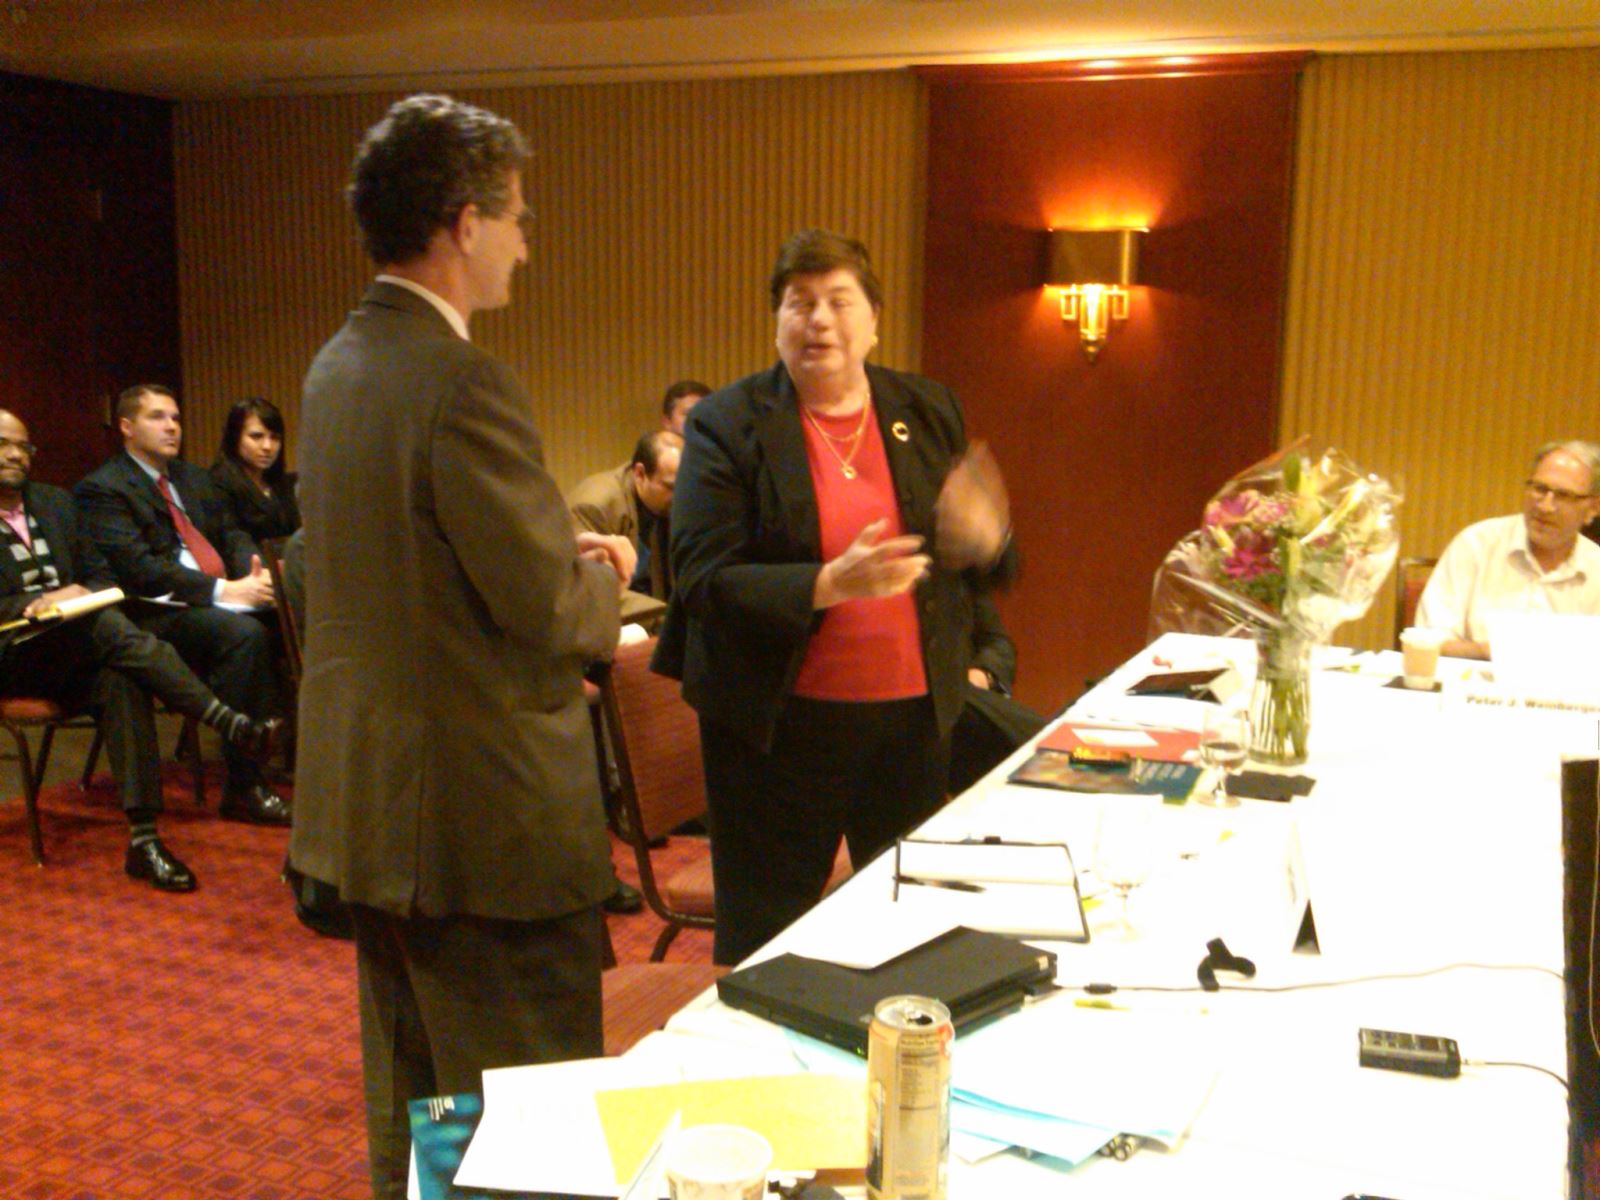 Dan Chenok (Chair, ISPAB) presents a bouquet to Cita Furlani (ITL Director, NIST) for her contribution and leadership.